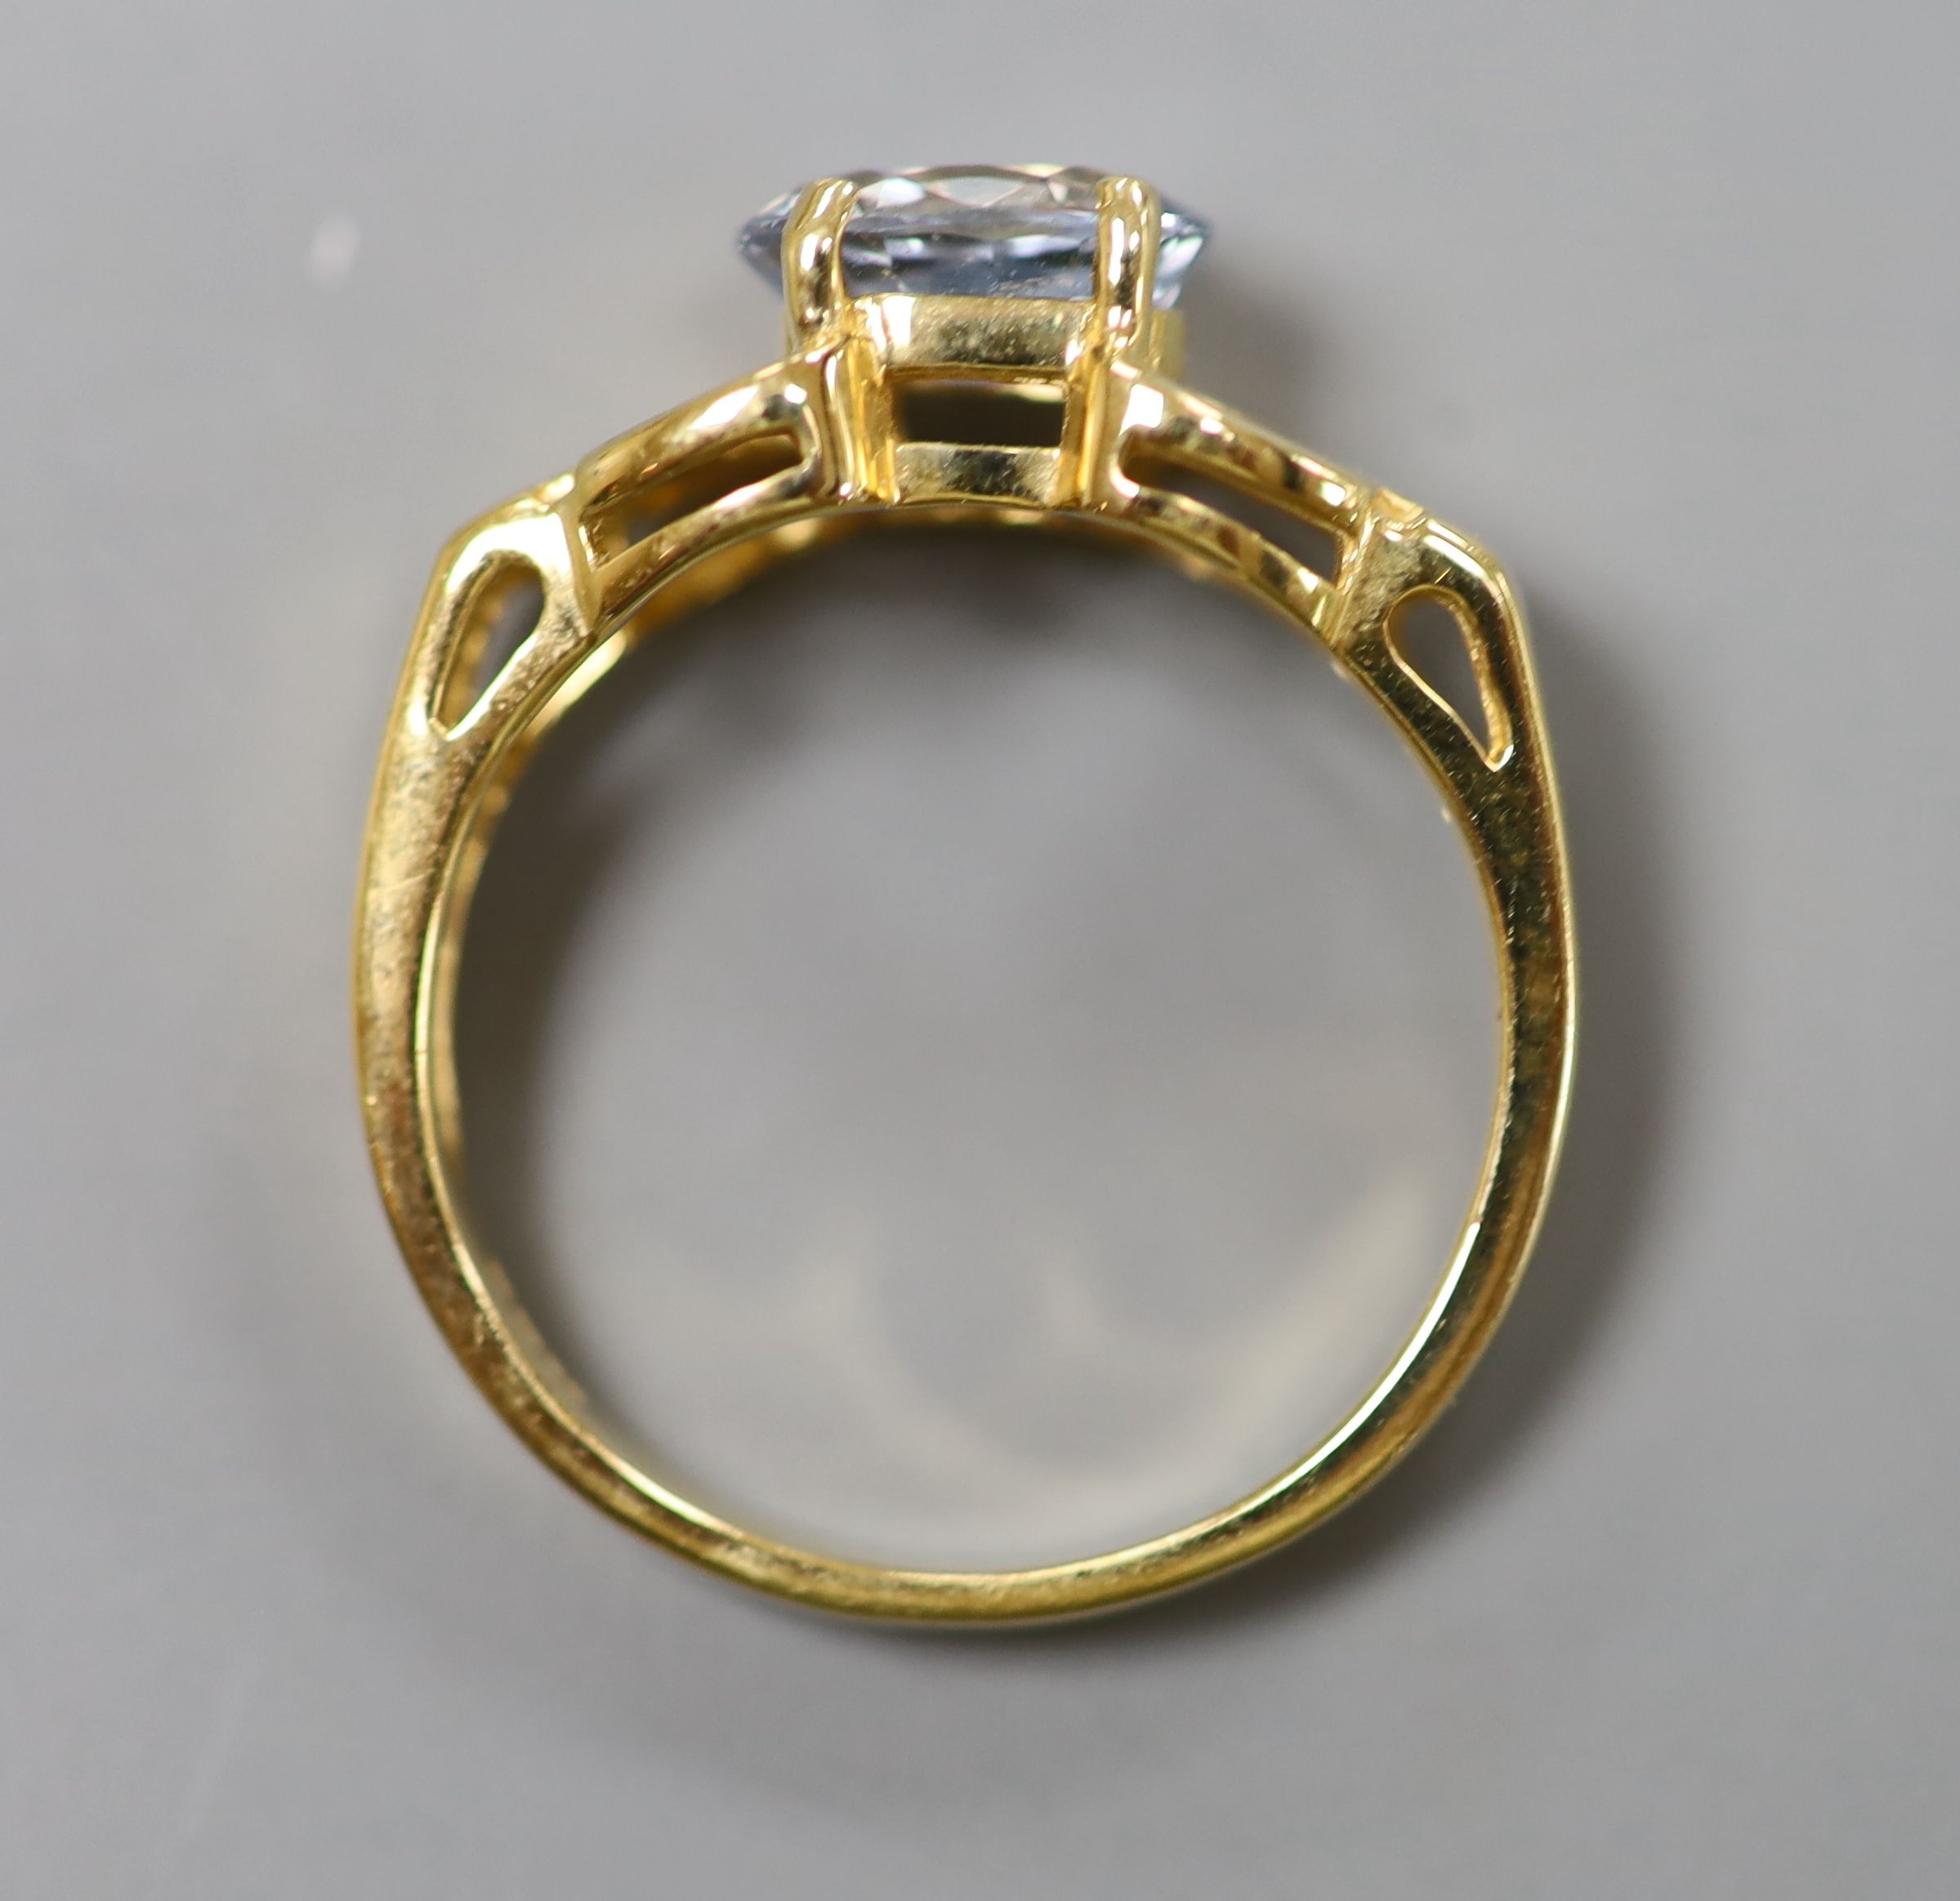 A pale aquamarine ring, pierced 18ct gold setting and shank and an 18ct gold and pale sapphire ring